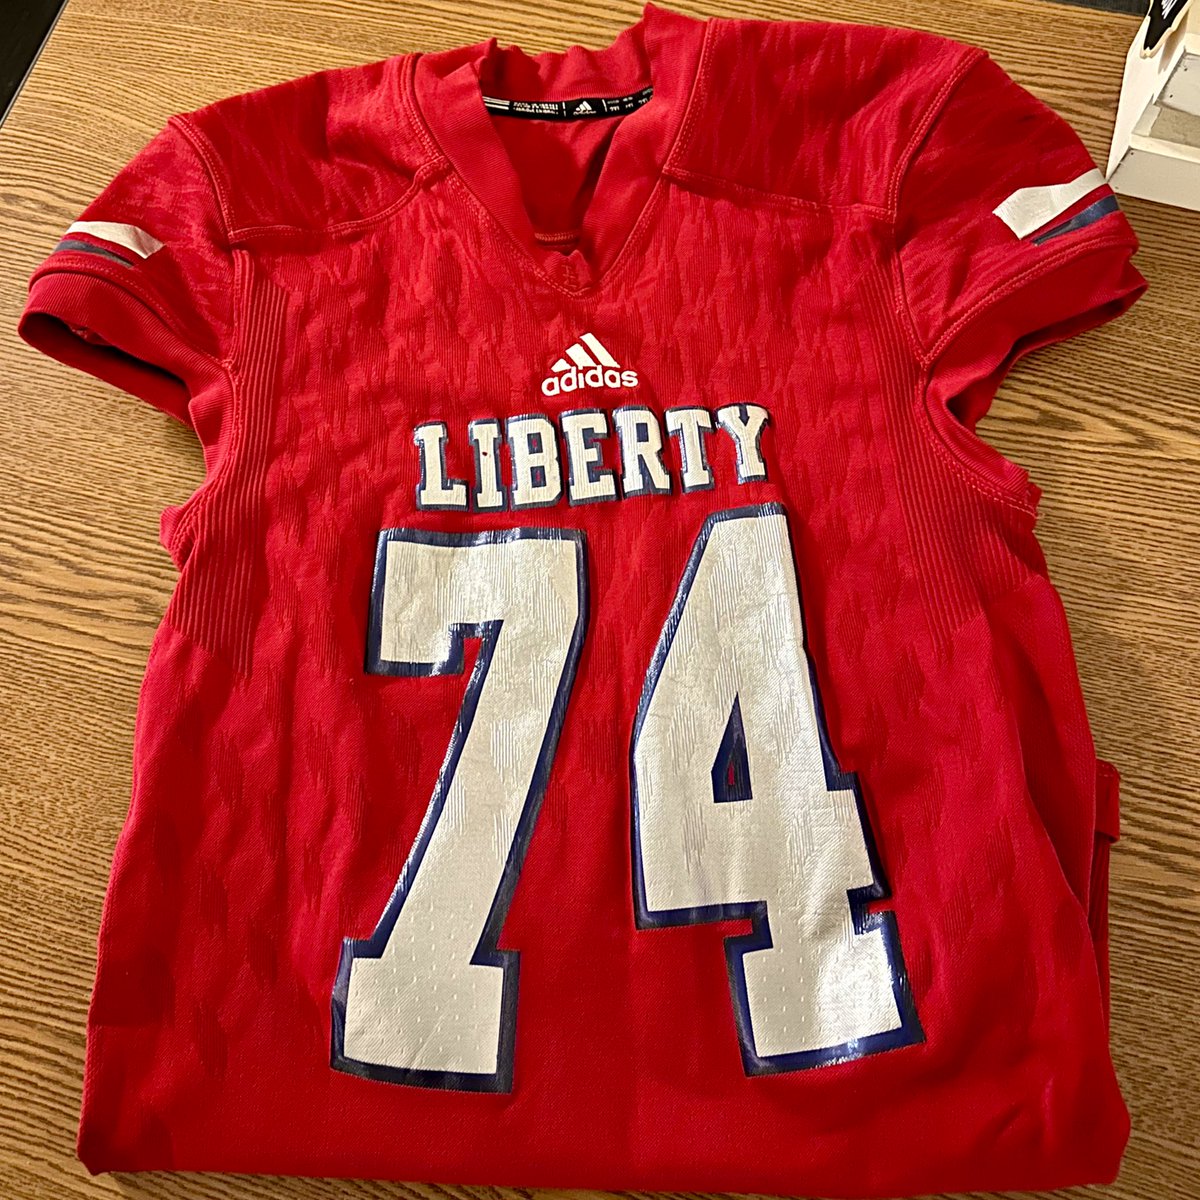 It is Senior Night at @LHSPats! 
Congratulations to the Class of 2024 @Libertyotball players! What a ride! Thank you for giving your all for Liberty! #ForeverAPatriot 

#Liberty #LibertyPatriots #LHS #LasVegas #ThursdayNightLights #LHSPatsYearbook ❤️🤍💙

@muraco_lhs